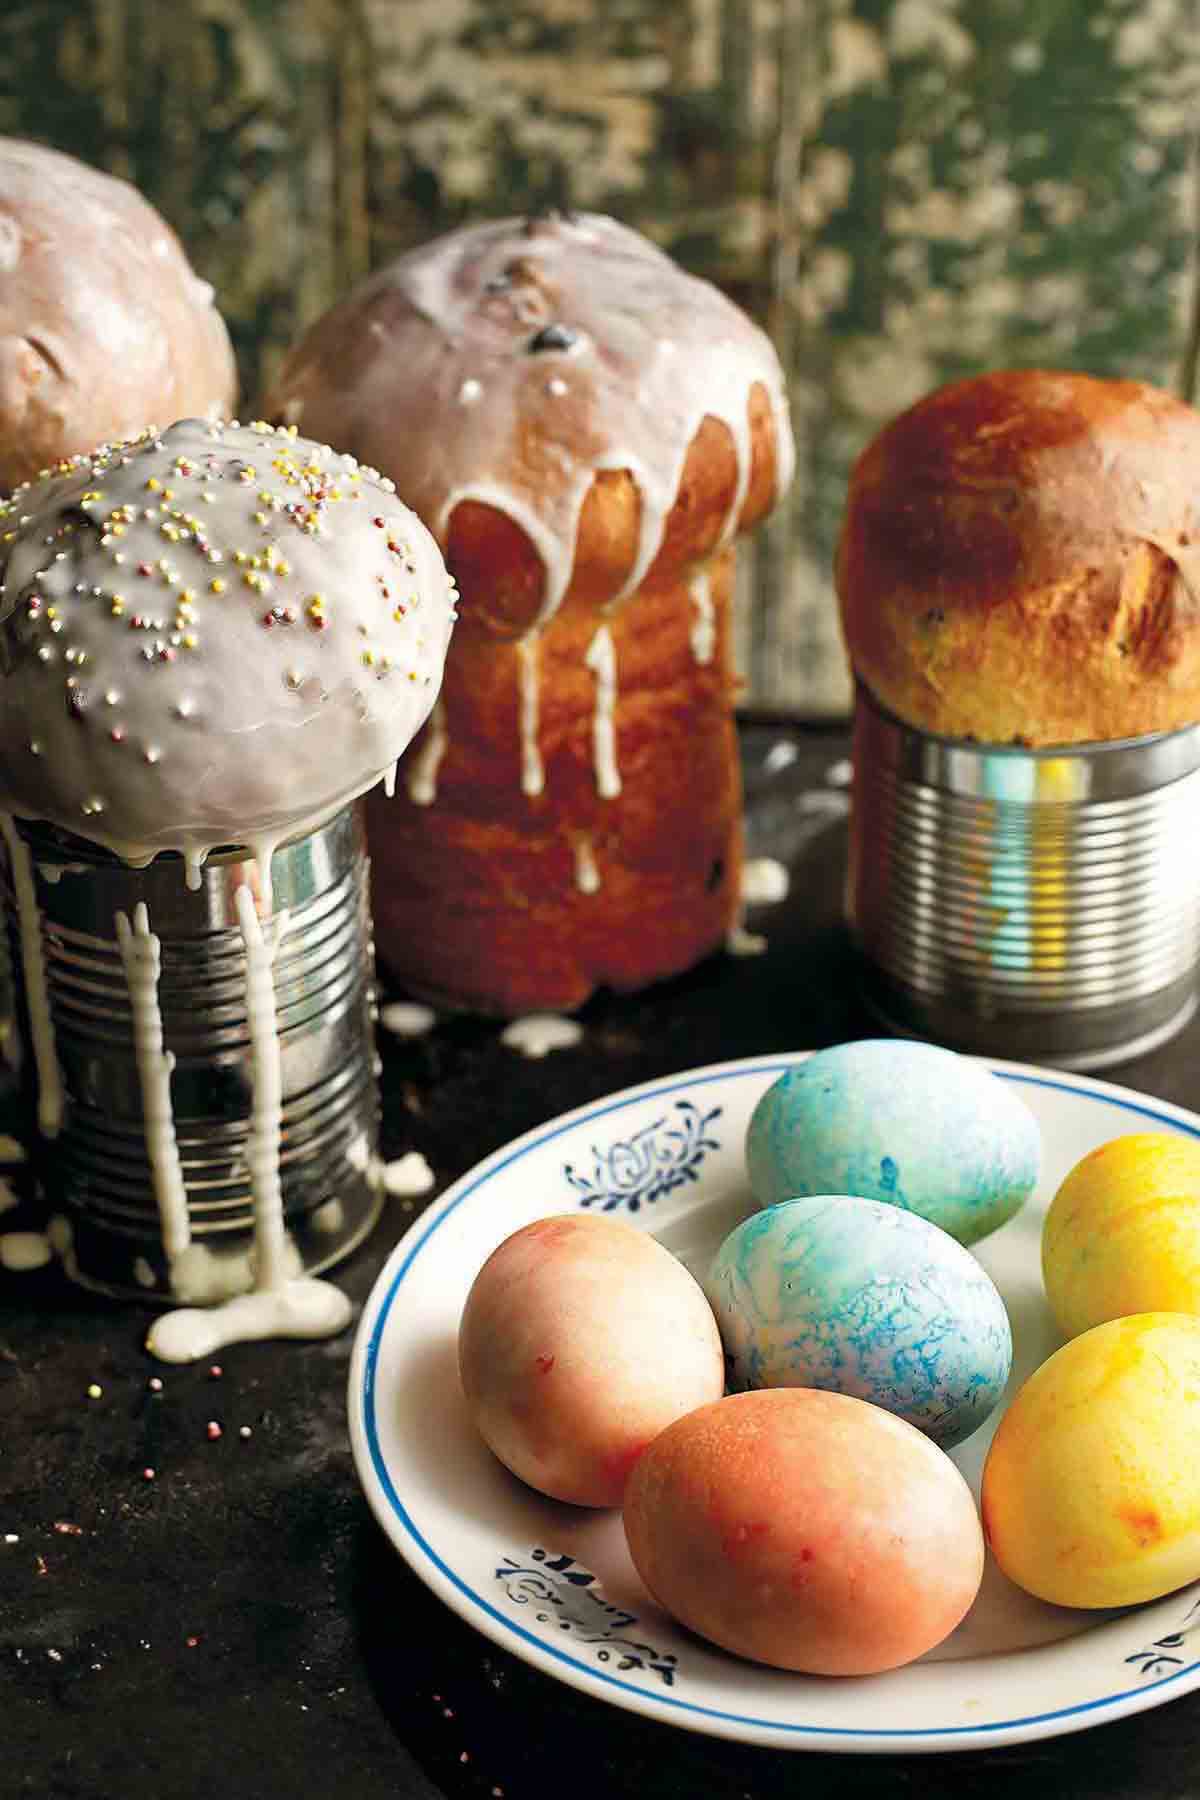 Four loaves of Ukrainian Easter bread, paska, with a bowl of colored eggs in front of them.